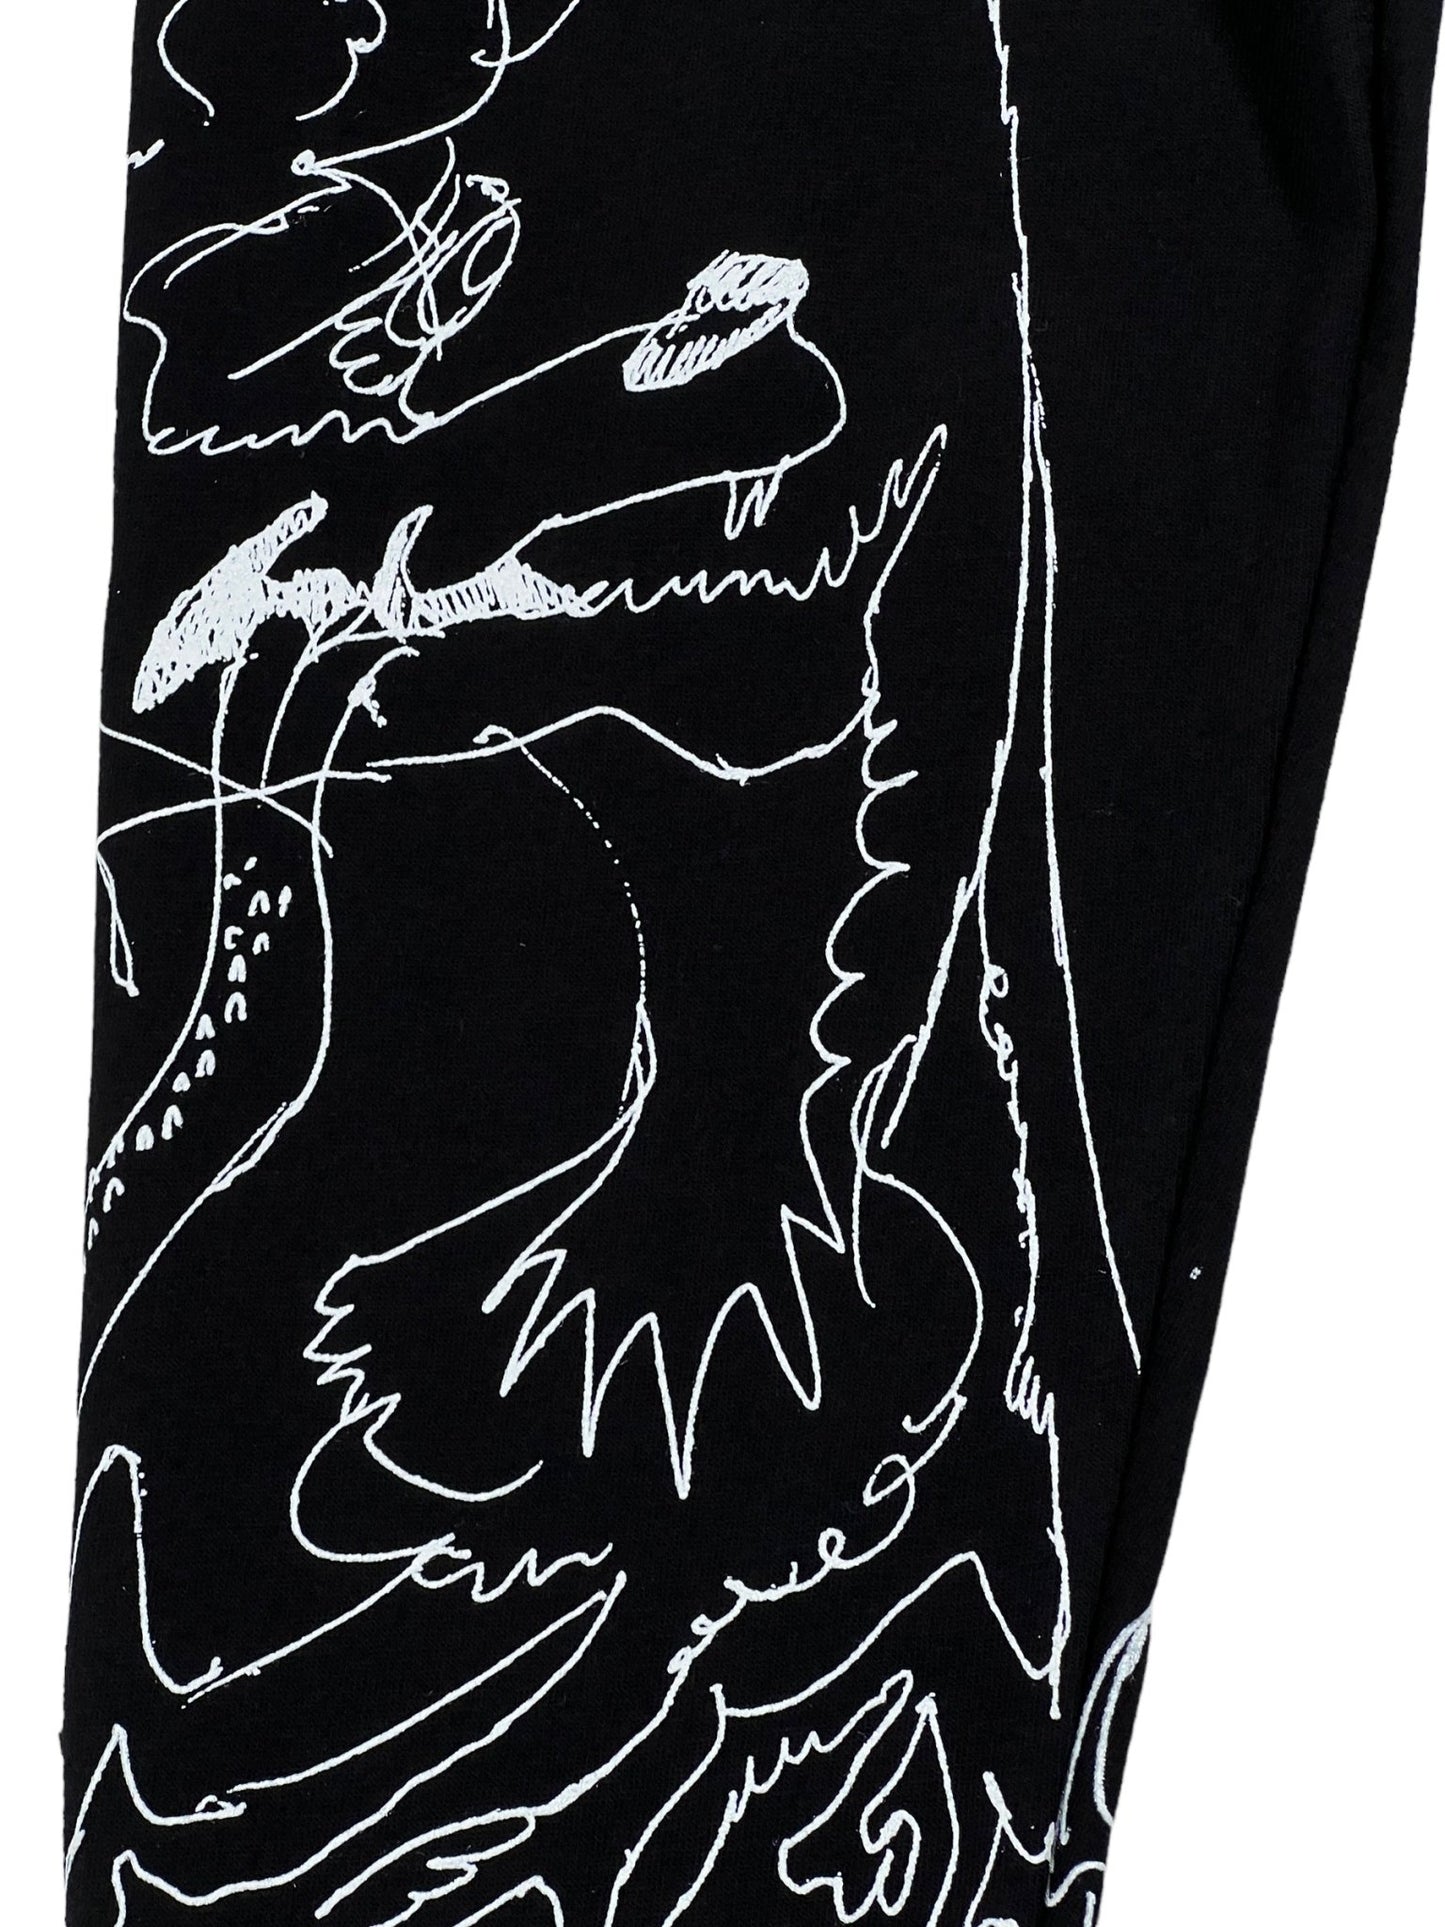 A DOMREBEL HIC long-sleeve t-shirt in black with a drawing of a dragon on it.